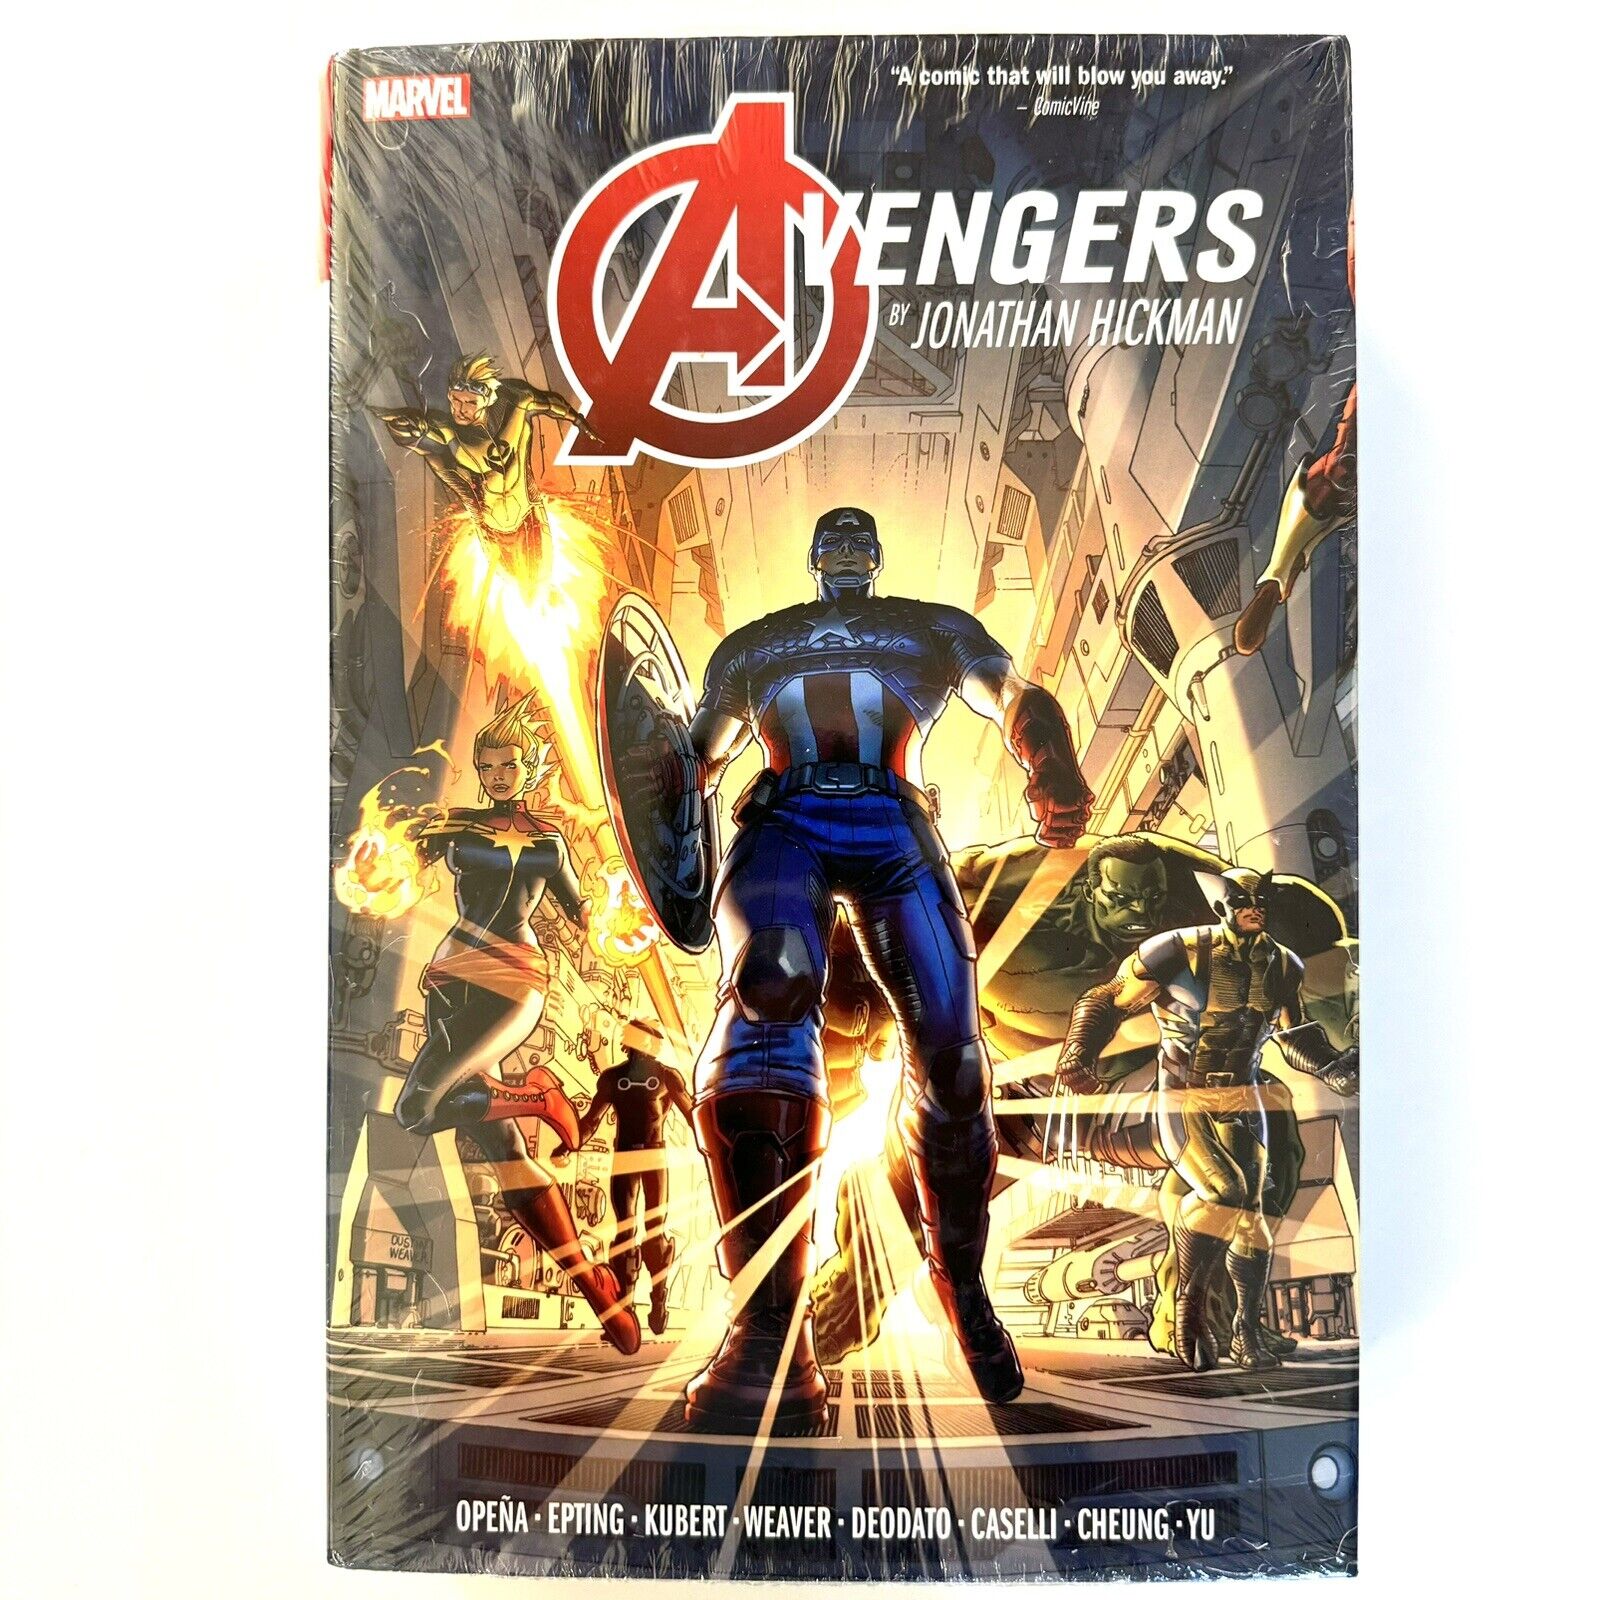 The Avengers by Jonathan Hickman Omnibus Vol 1 New Sealed $5 Flat Combined Ship